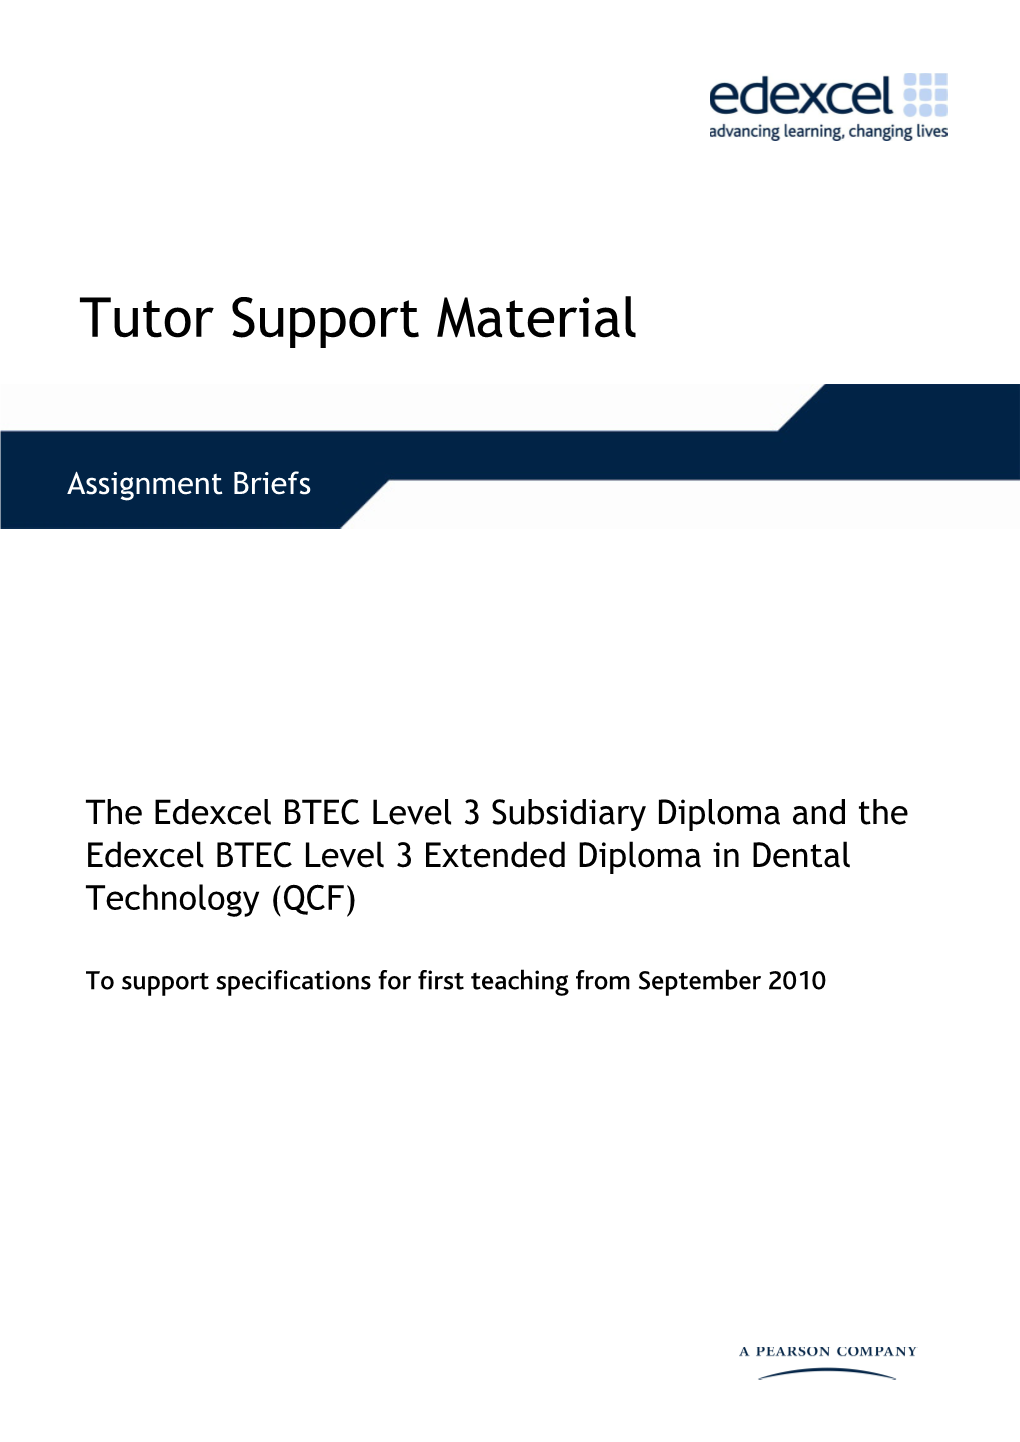 BTEC Extended Diploma in Dental Technology